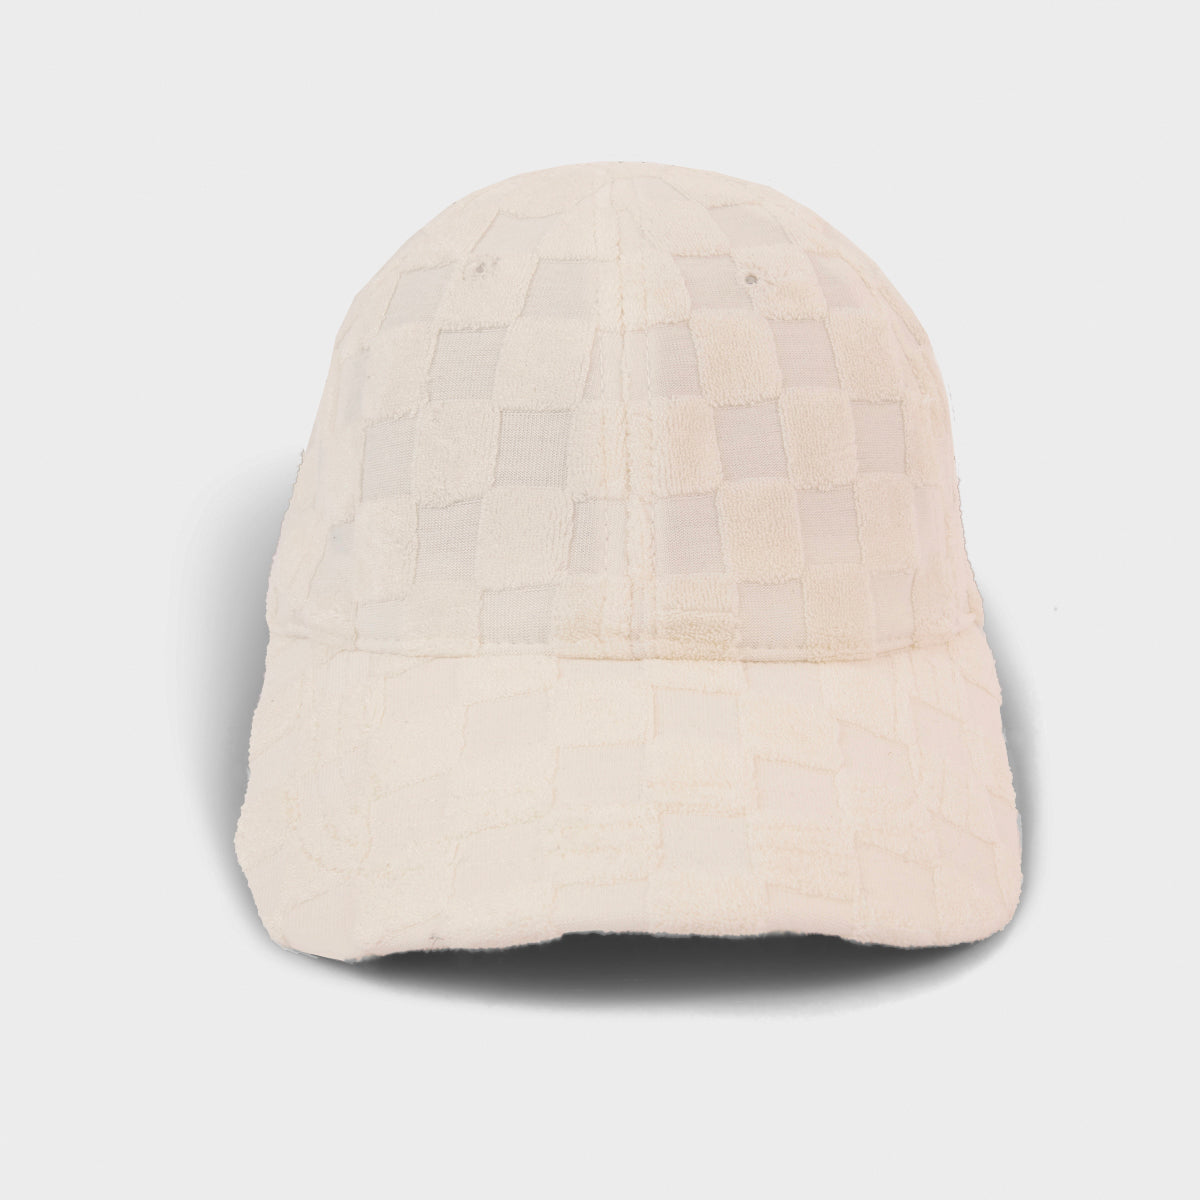 LV Leather Caps **** See Description When Ordering***